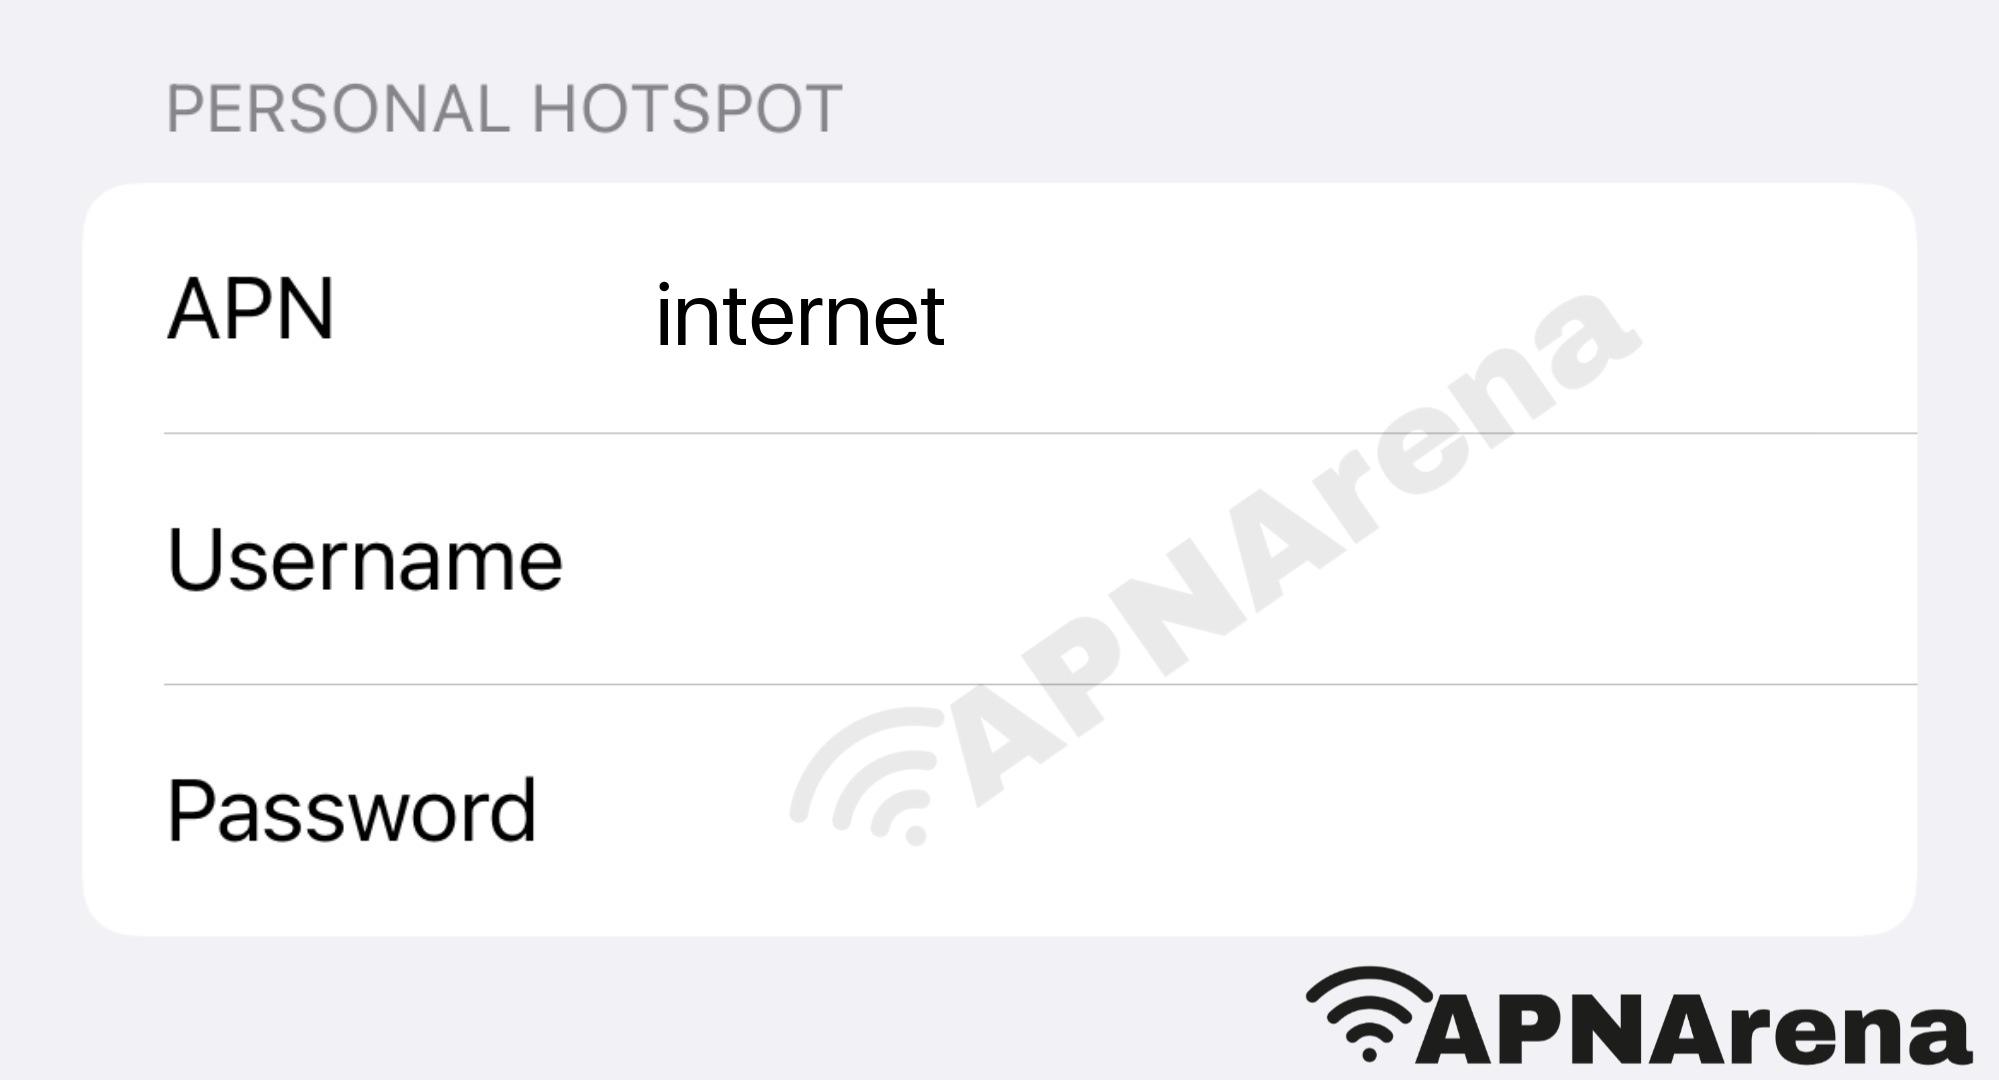 Cell C Personal Hotspot Settings for iPhone